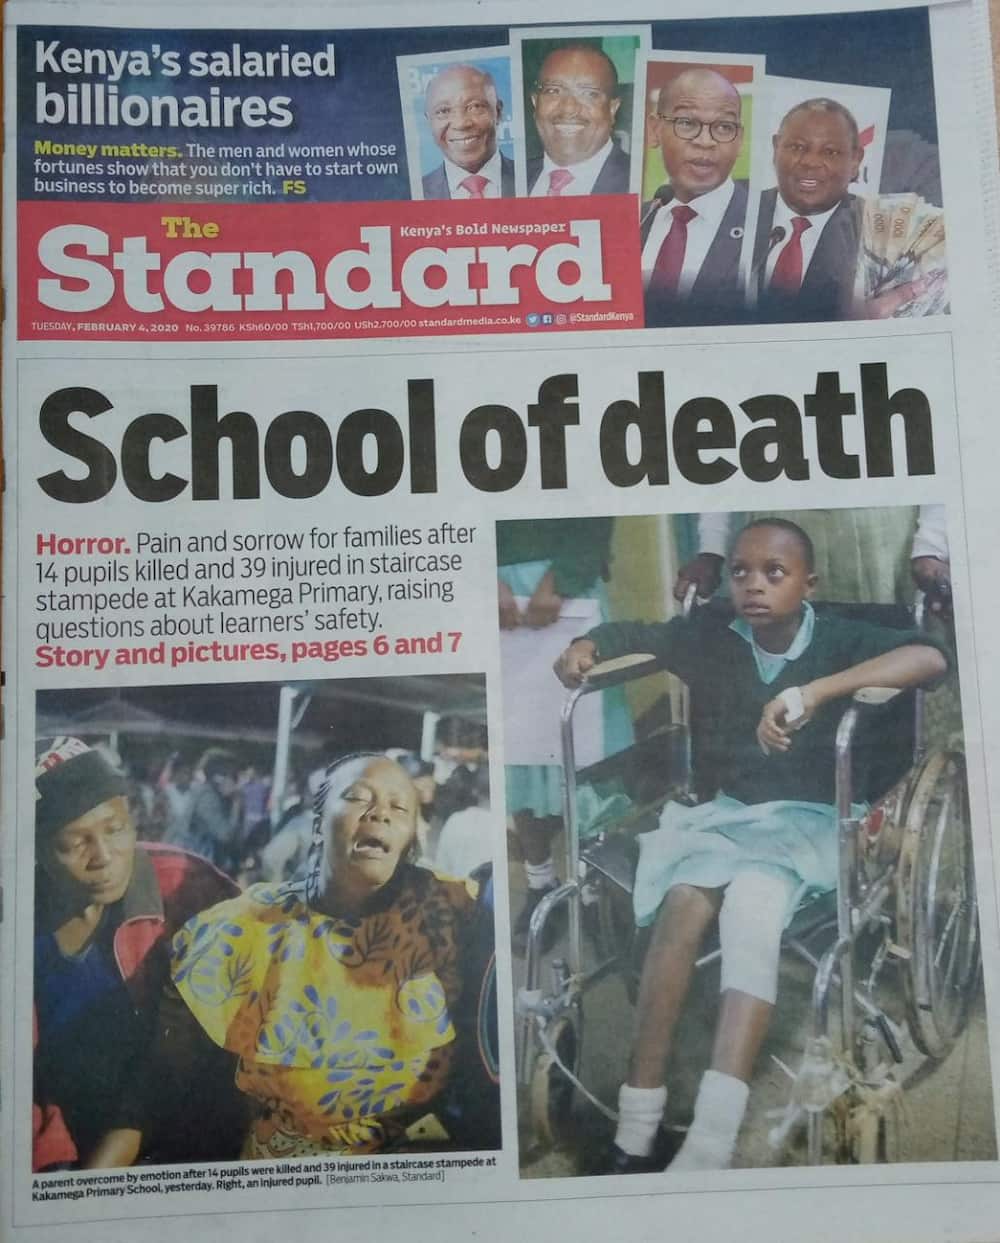 Kenyan newspapers review for February 4: Kakamega pupils in deadly stampede were running from teacher wielding cane